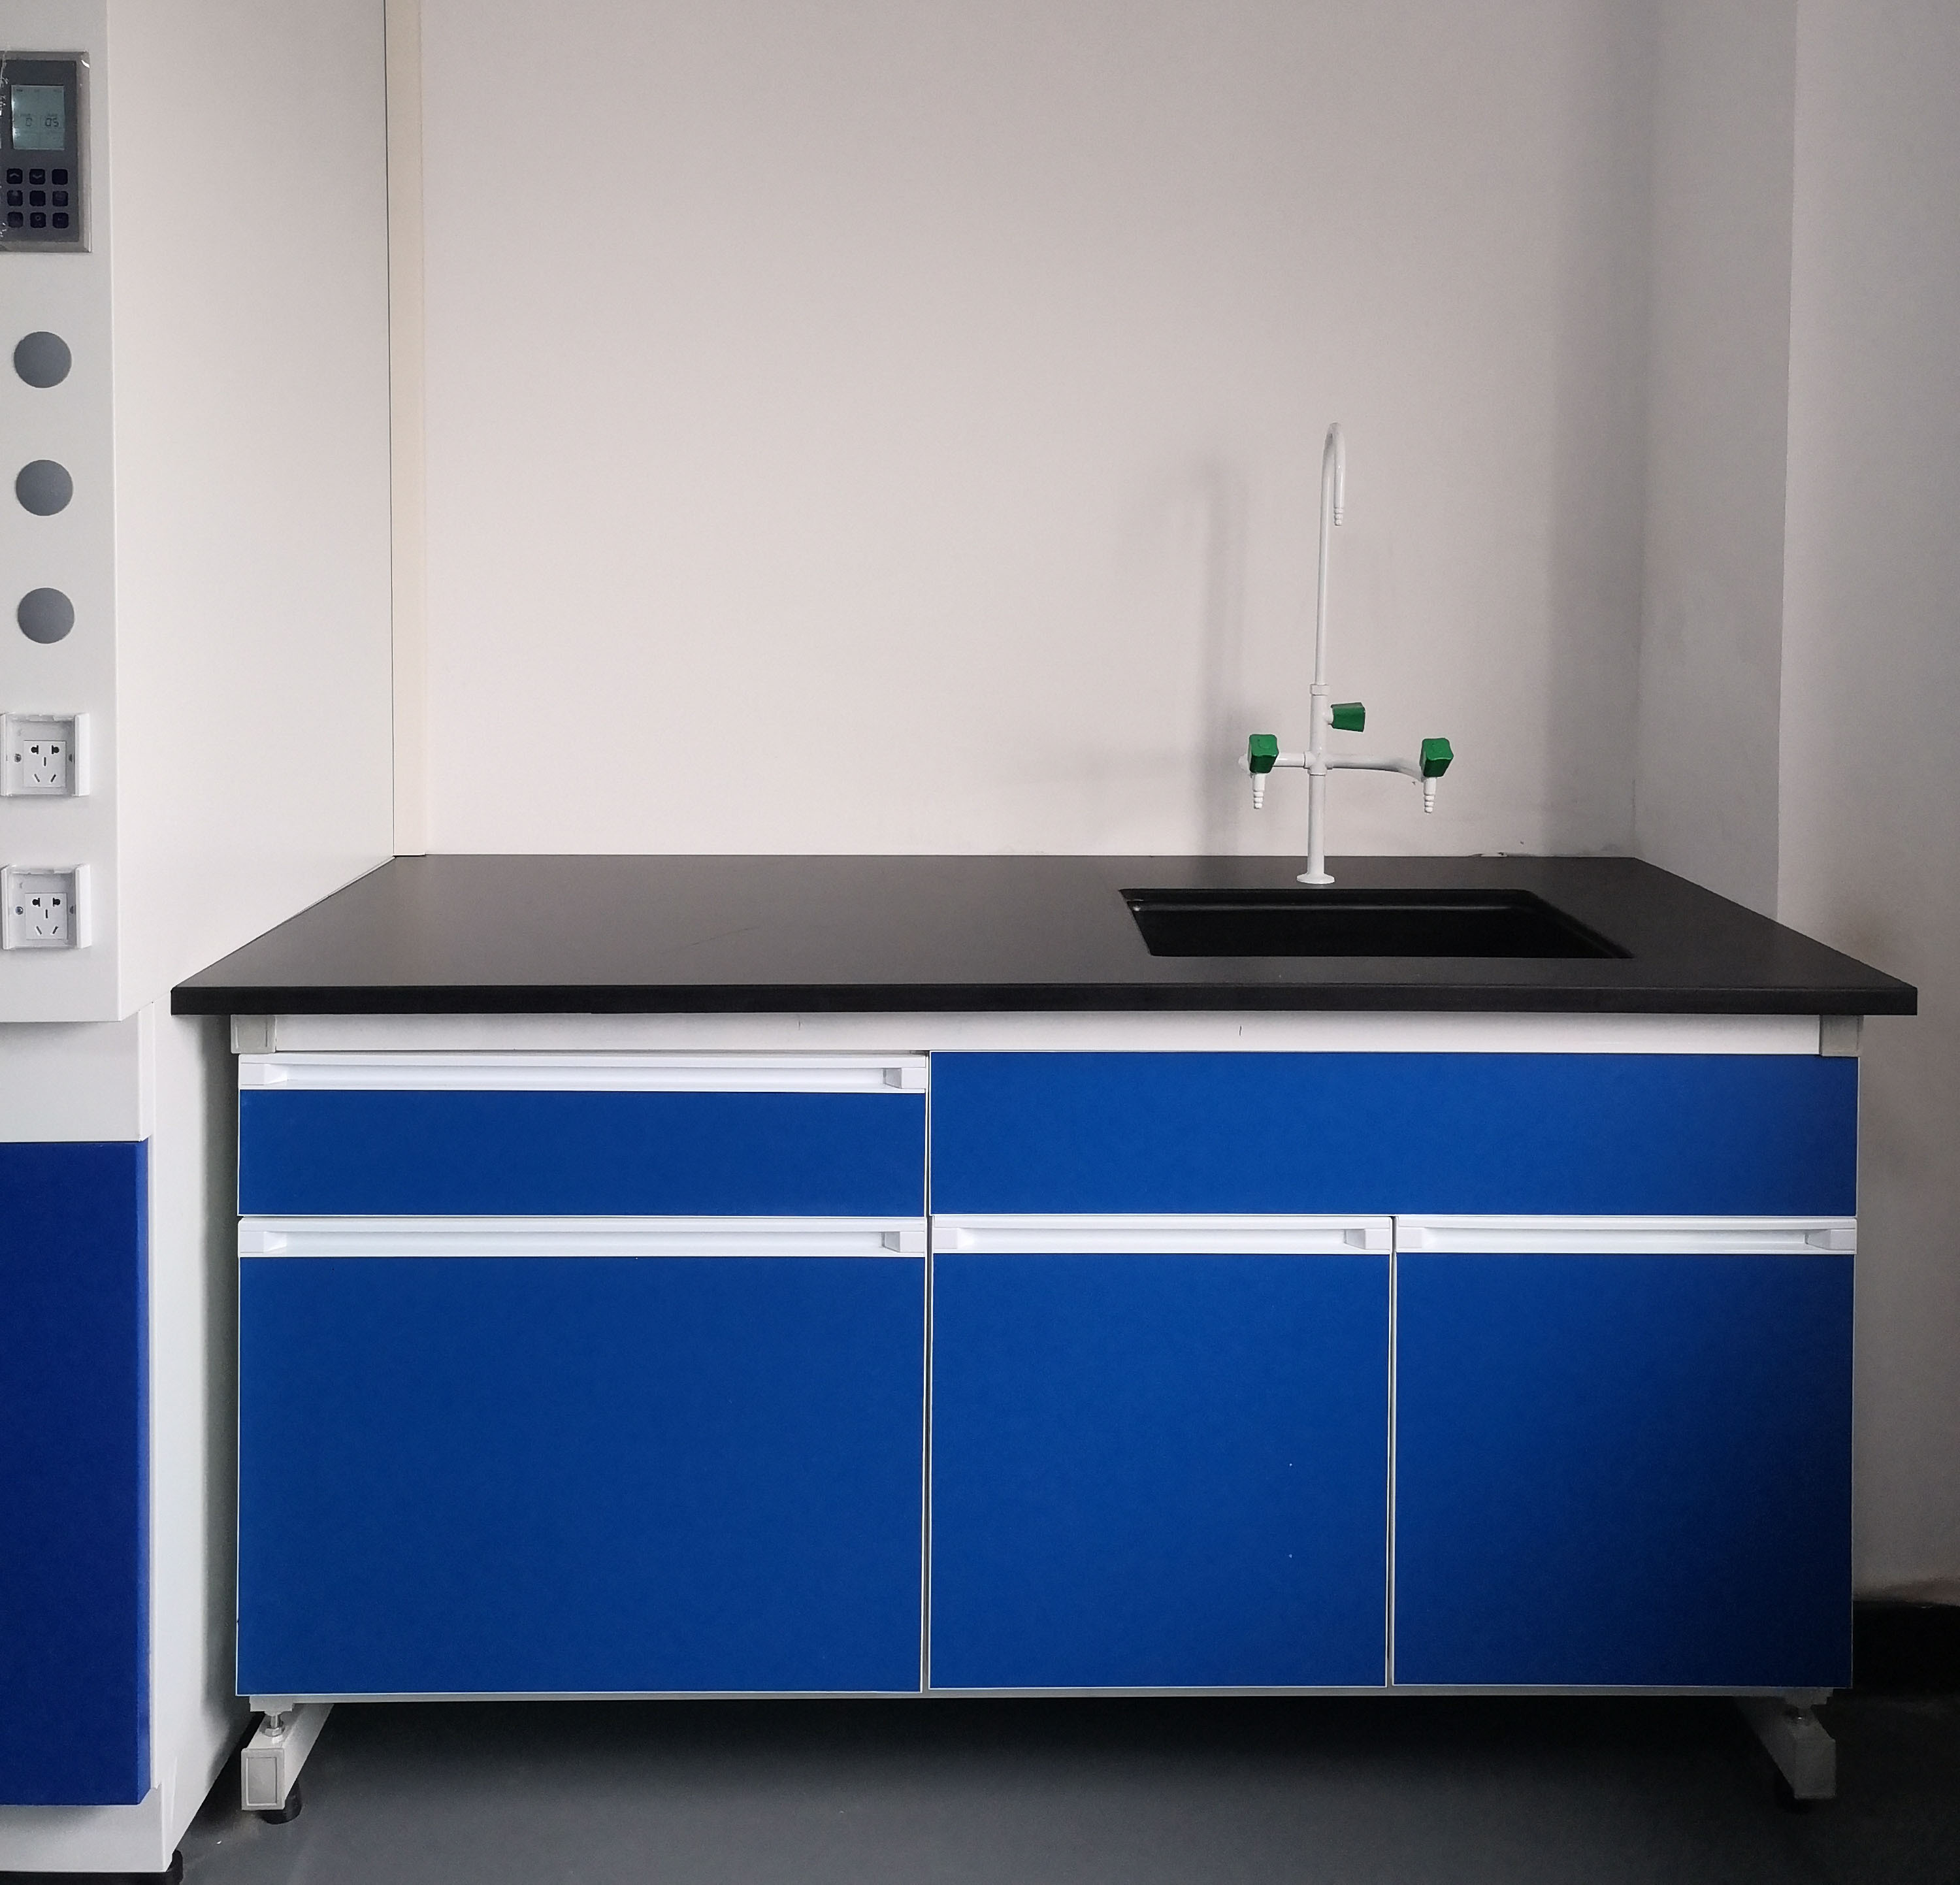 Factory Cheap Price Steel Wood Corrosion Resistance Laboratory Workbench with PP Sink & Faucets Factory Cheap Price Steel Wood Corrosion Resistance Laboratory Workbench with PP Sink & Faucets